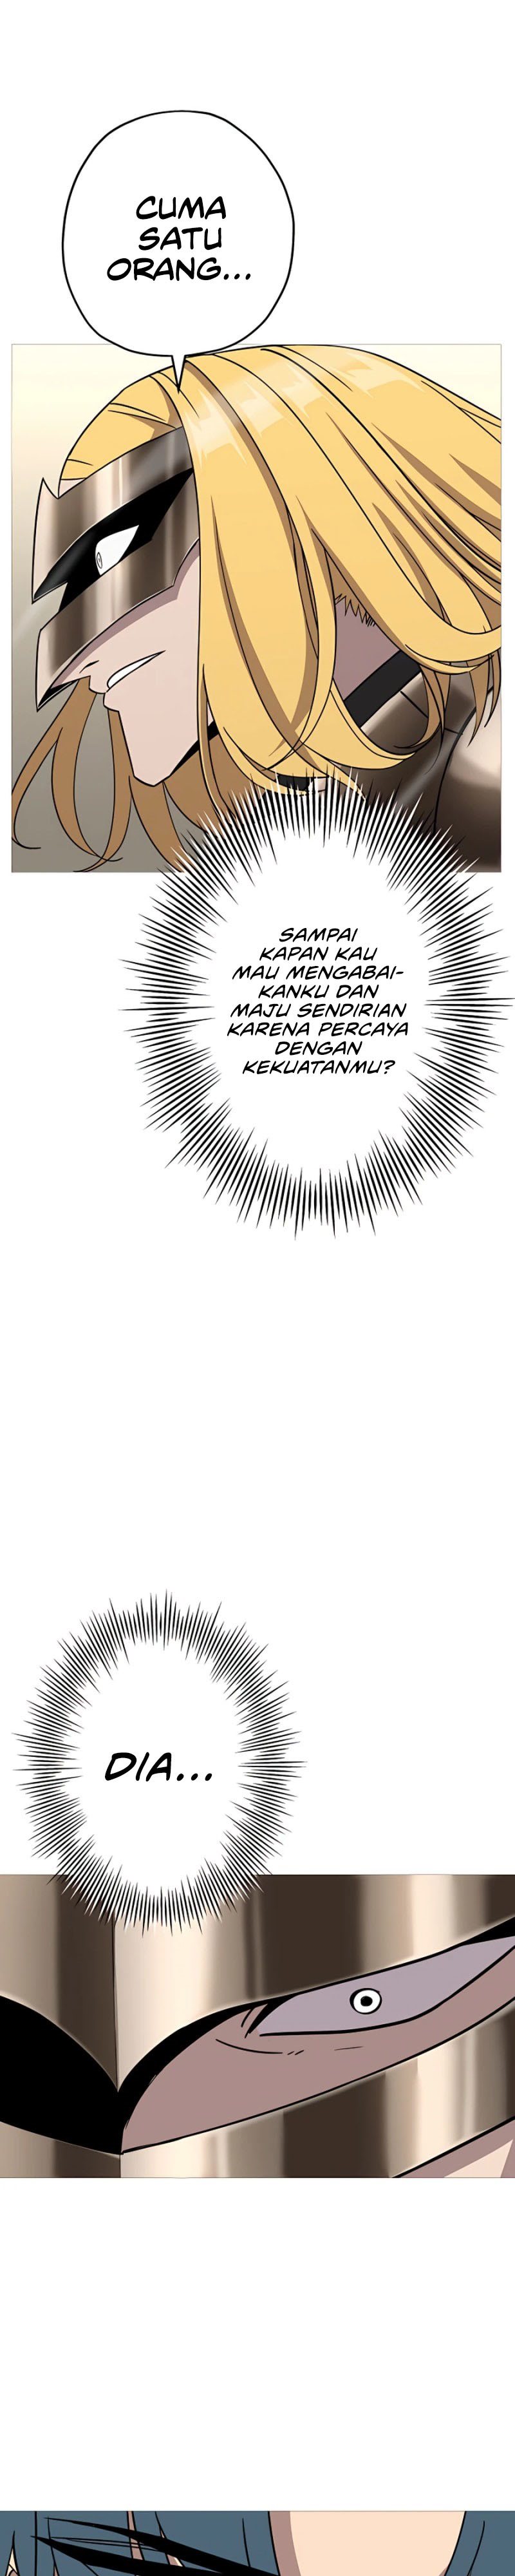 Dilarang COPAS - situs resmi www.mangacanblog.com - Komik the story of a low rank soldier becoming a monarch 088 - chapter 88 89 Indonesia the story of a low rank soldier becoming a monarch 088 - chapter 88 Terbaru 44|Baca Manga Komik Indonesia|Mangacan